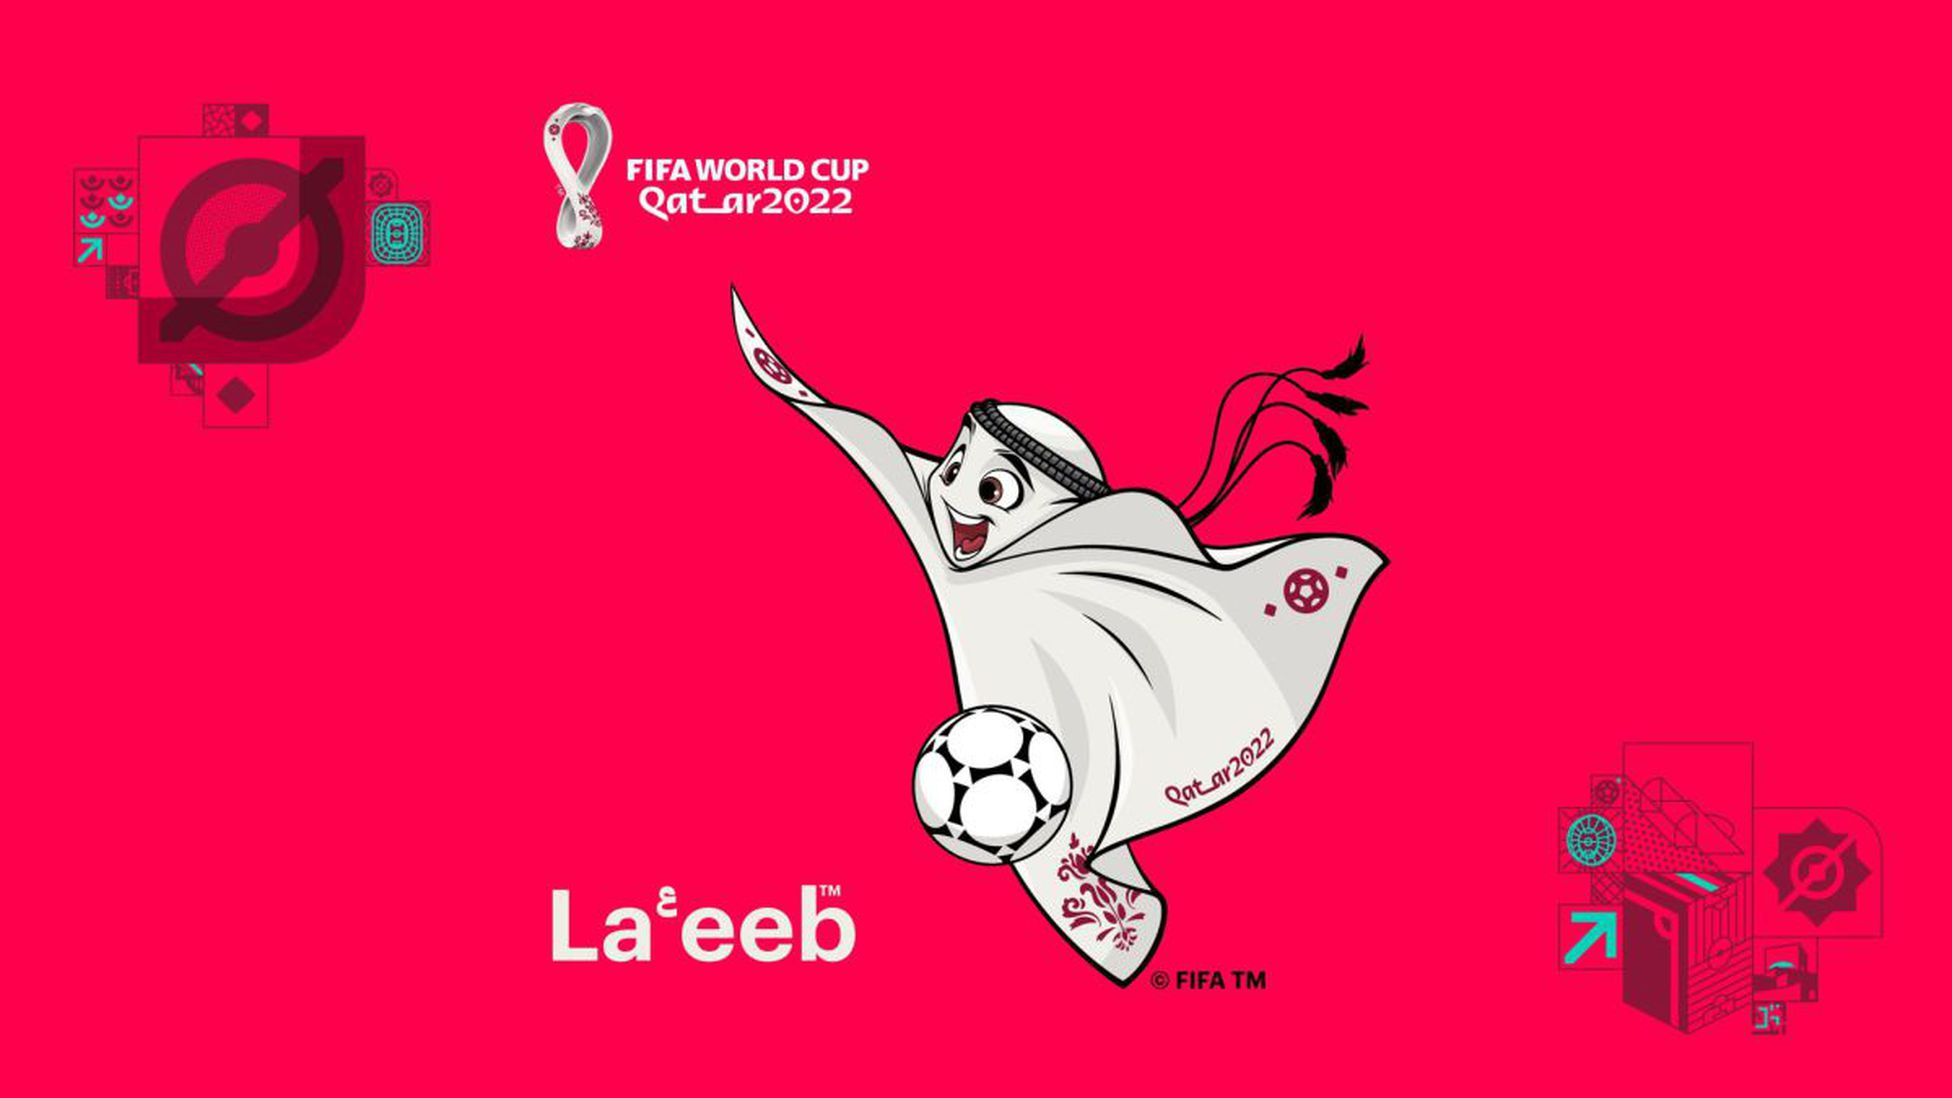 World Cup 2022 Mascot Is Called La'eeb And Is A Super Skilled Soccer Player